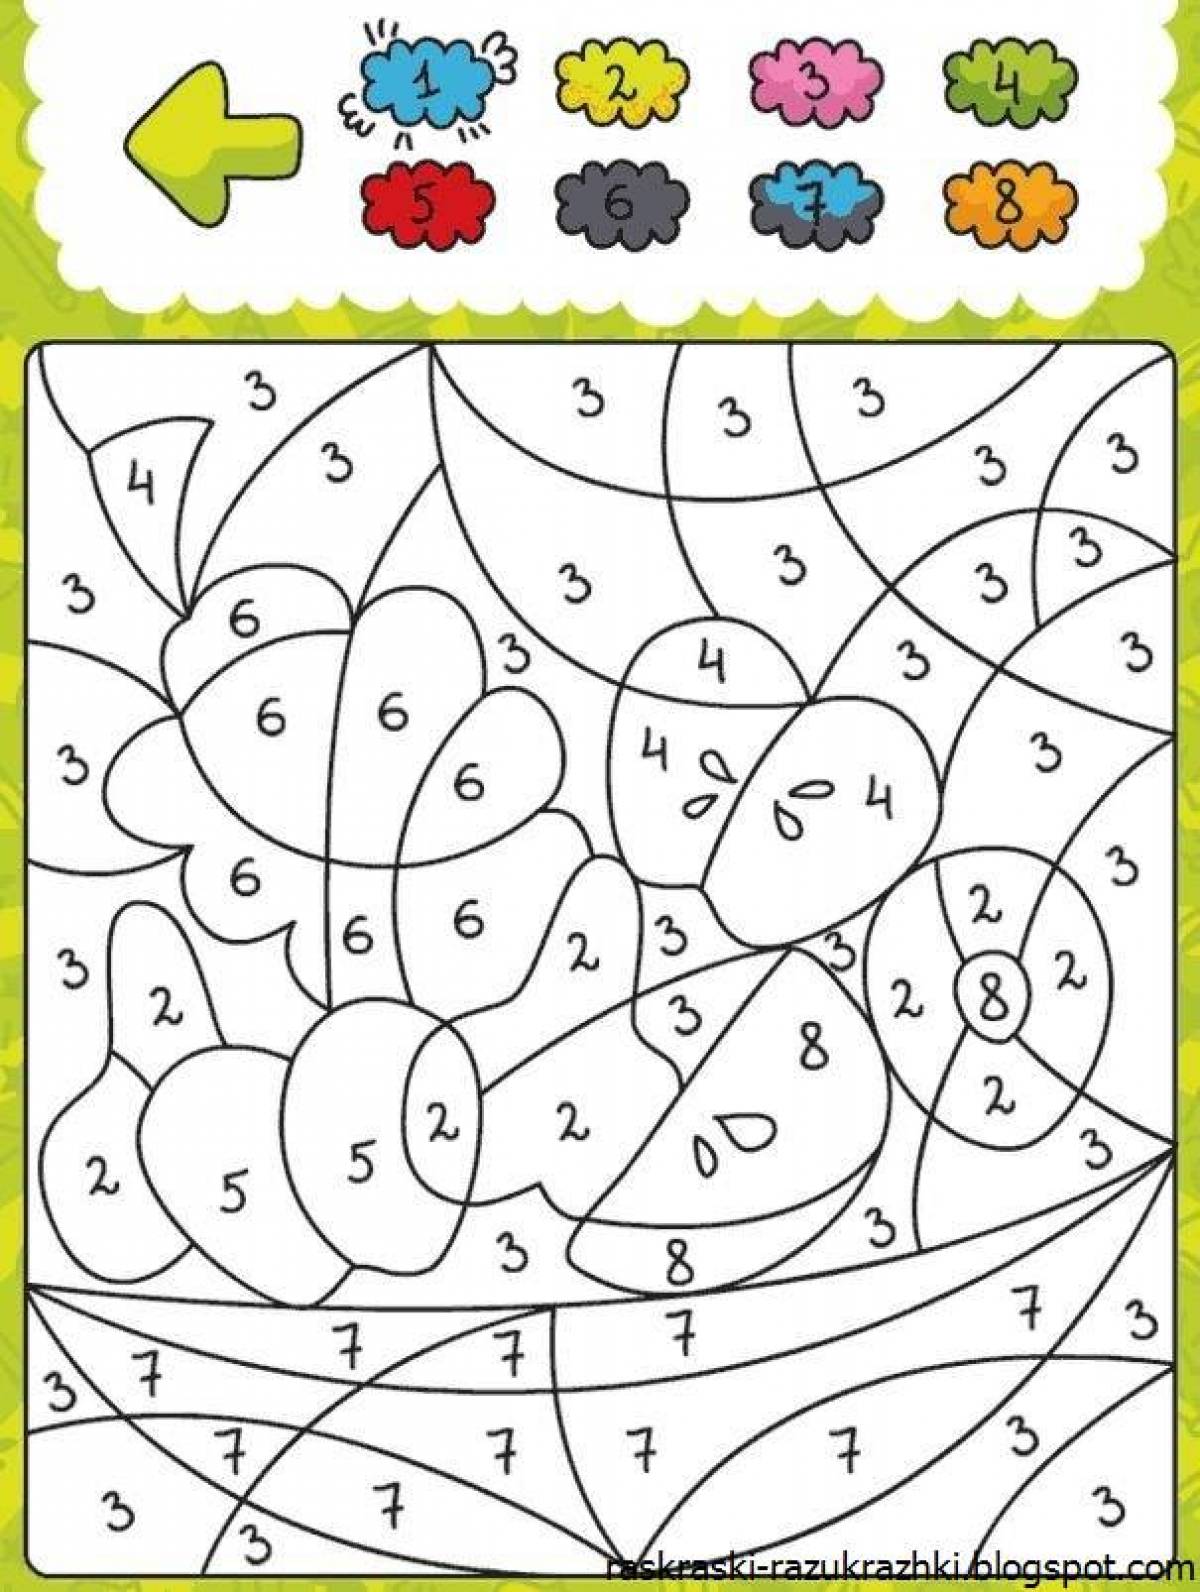 A fun coloring book with tasks for kids 6-7 years old